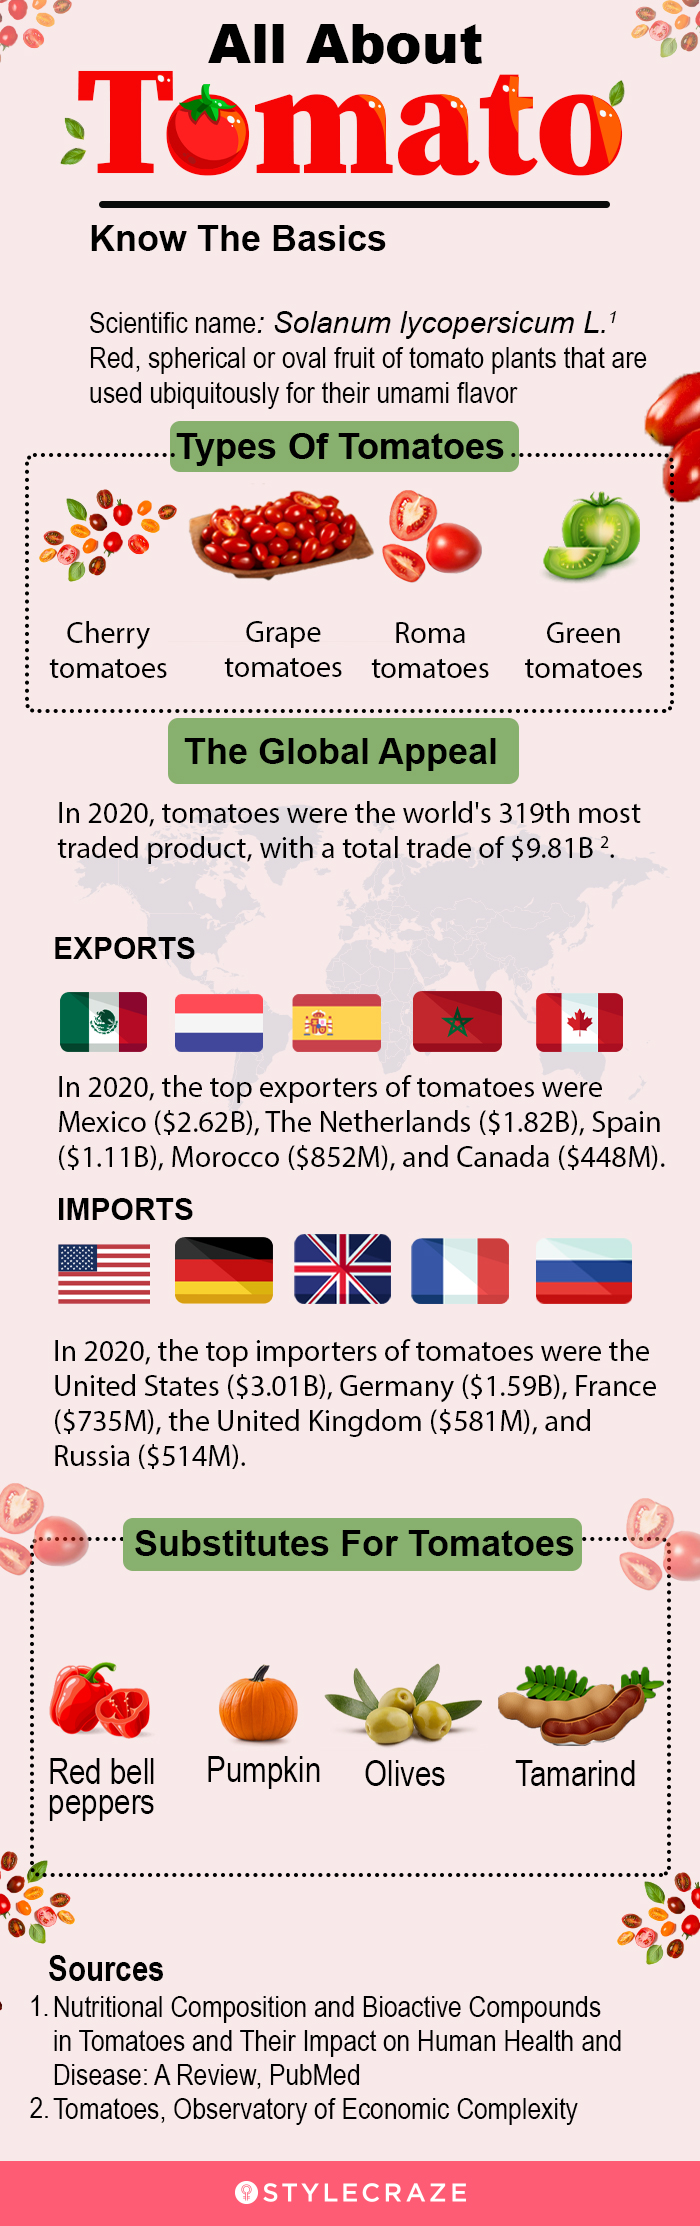 all about tomato [infographic]